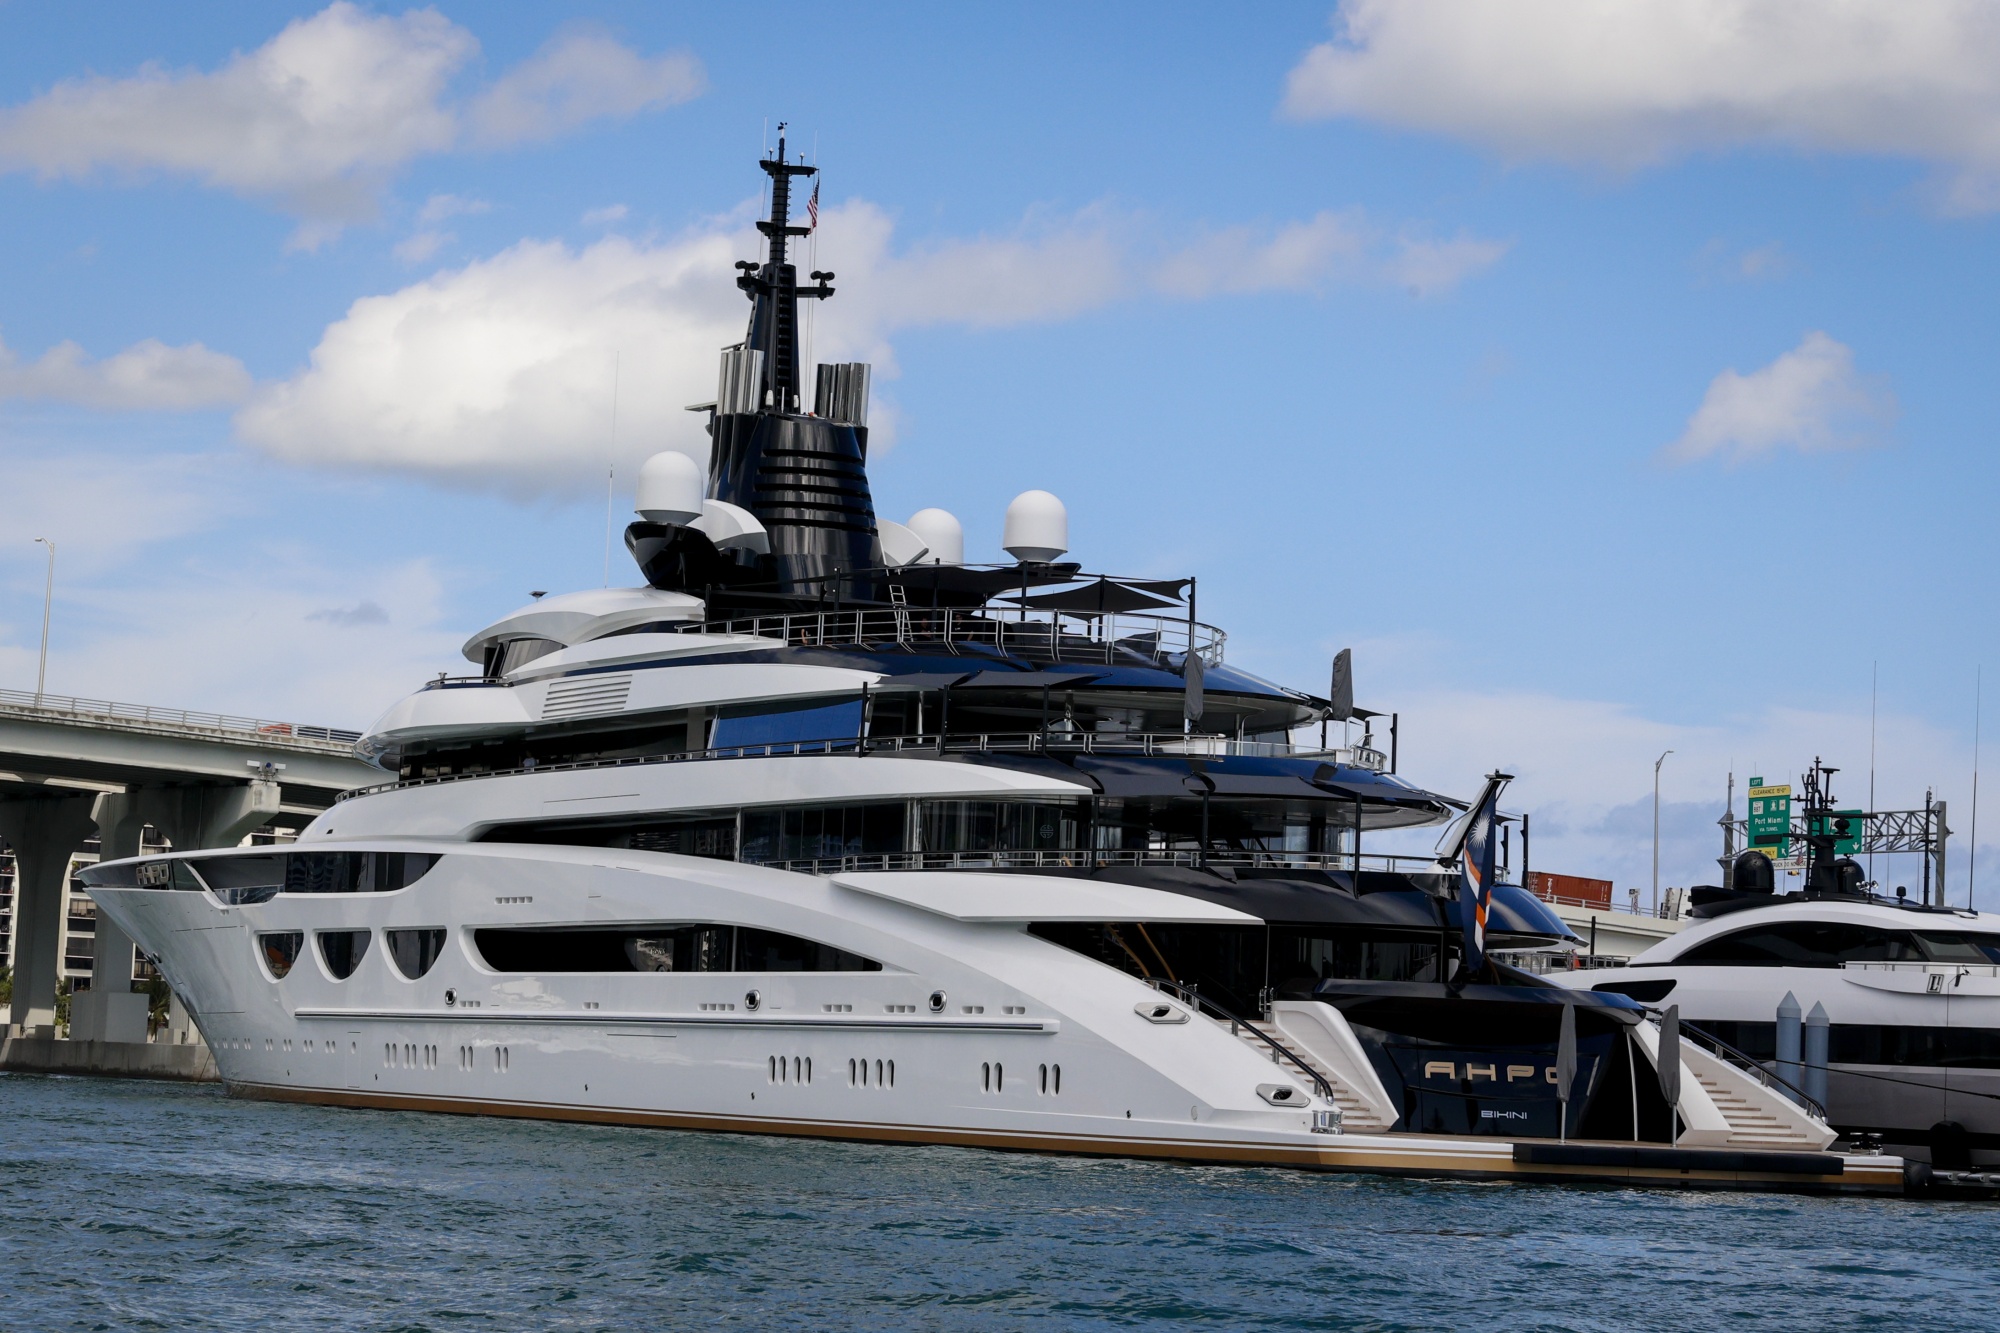 The Lurssen Ahpo superyacht during the Discover Boating Miami International Boat Show in February.&nbsp;